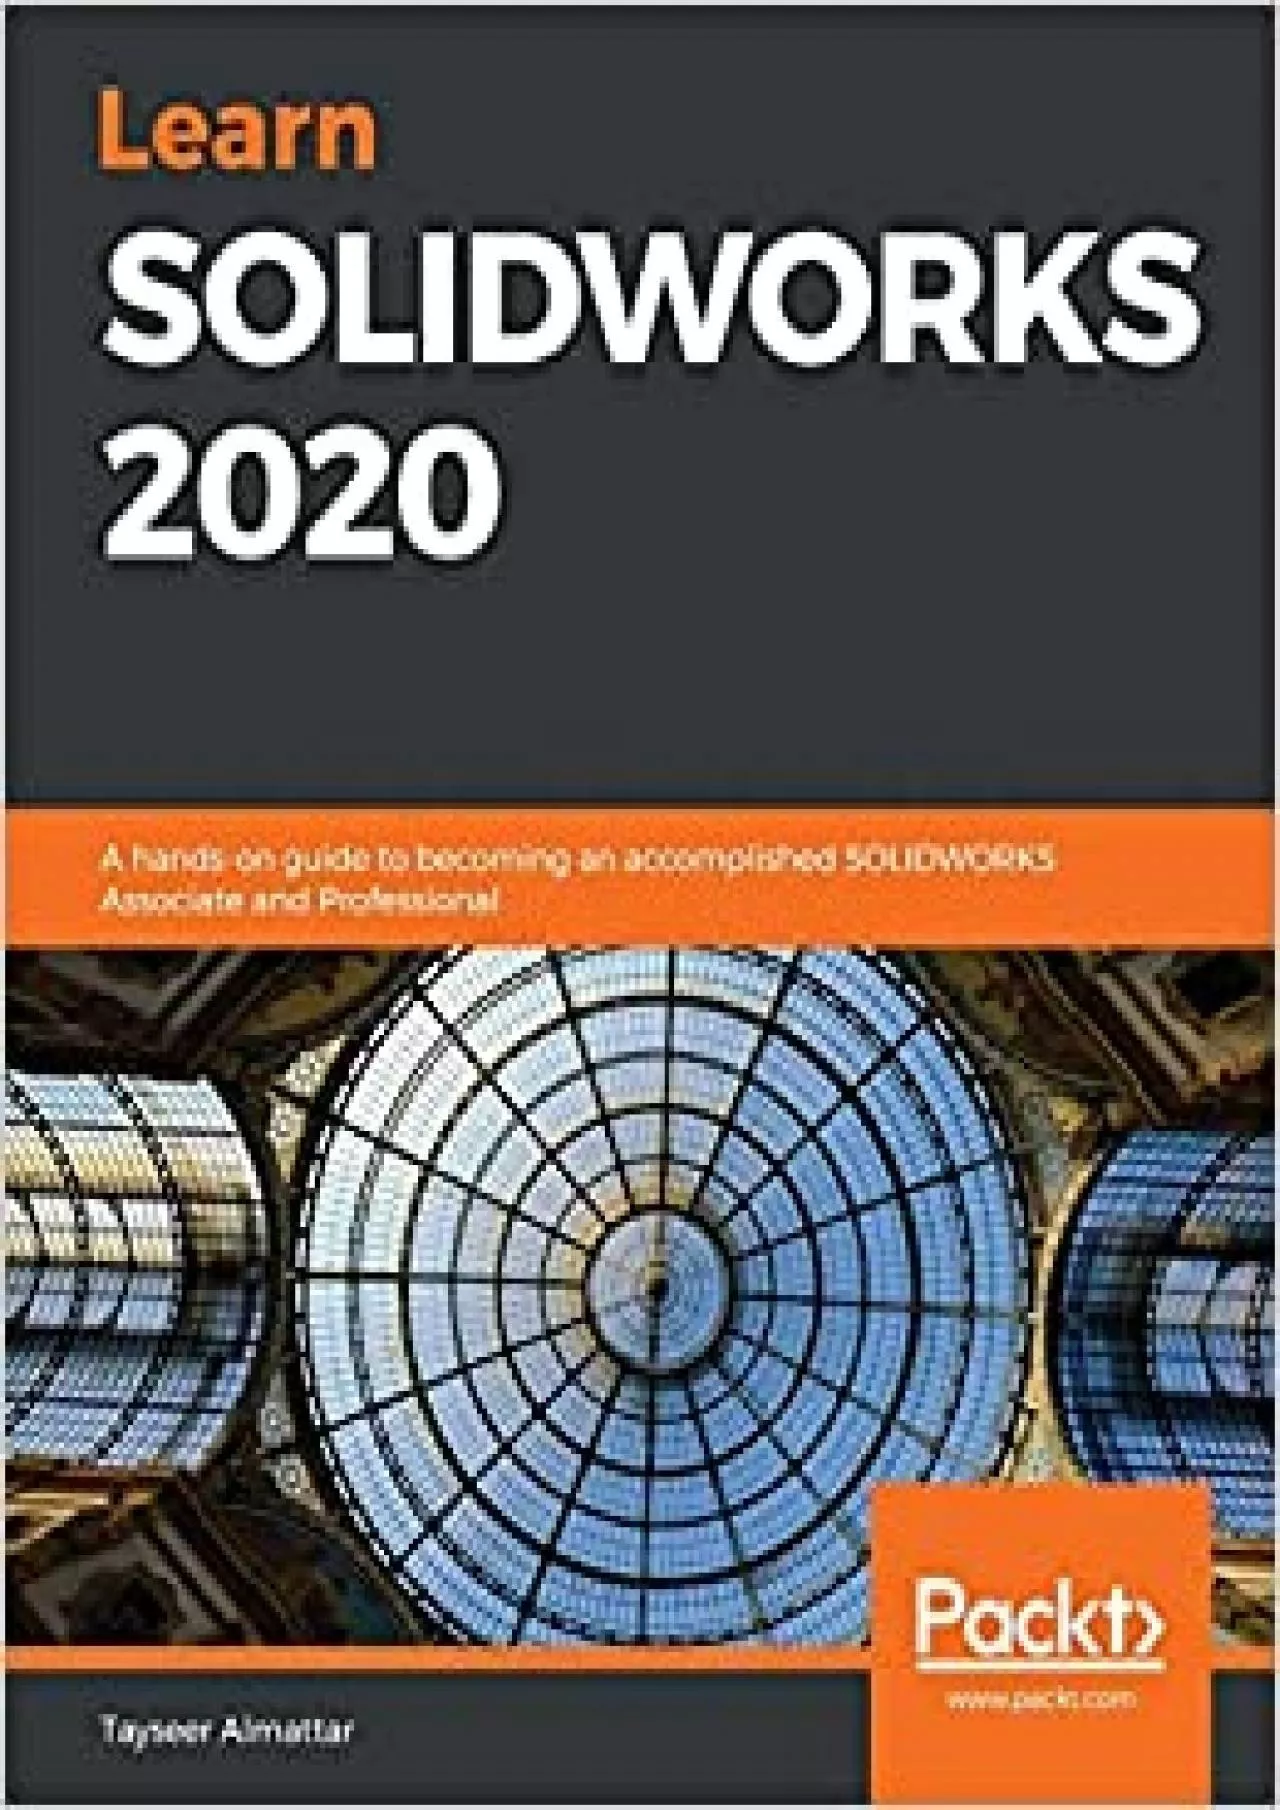 Learn SOLIDWORKS 2020: A hands-on guide to becoming an accomplished SOLIDWORKS Associate